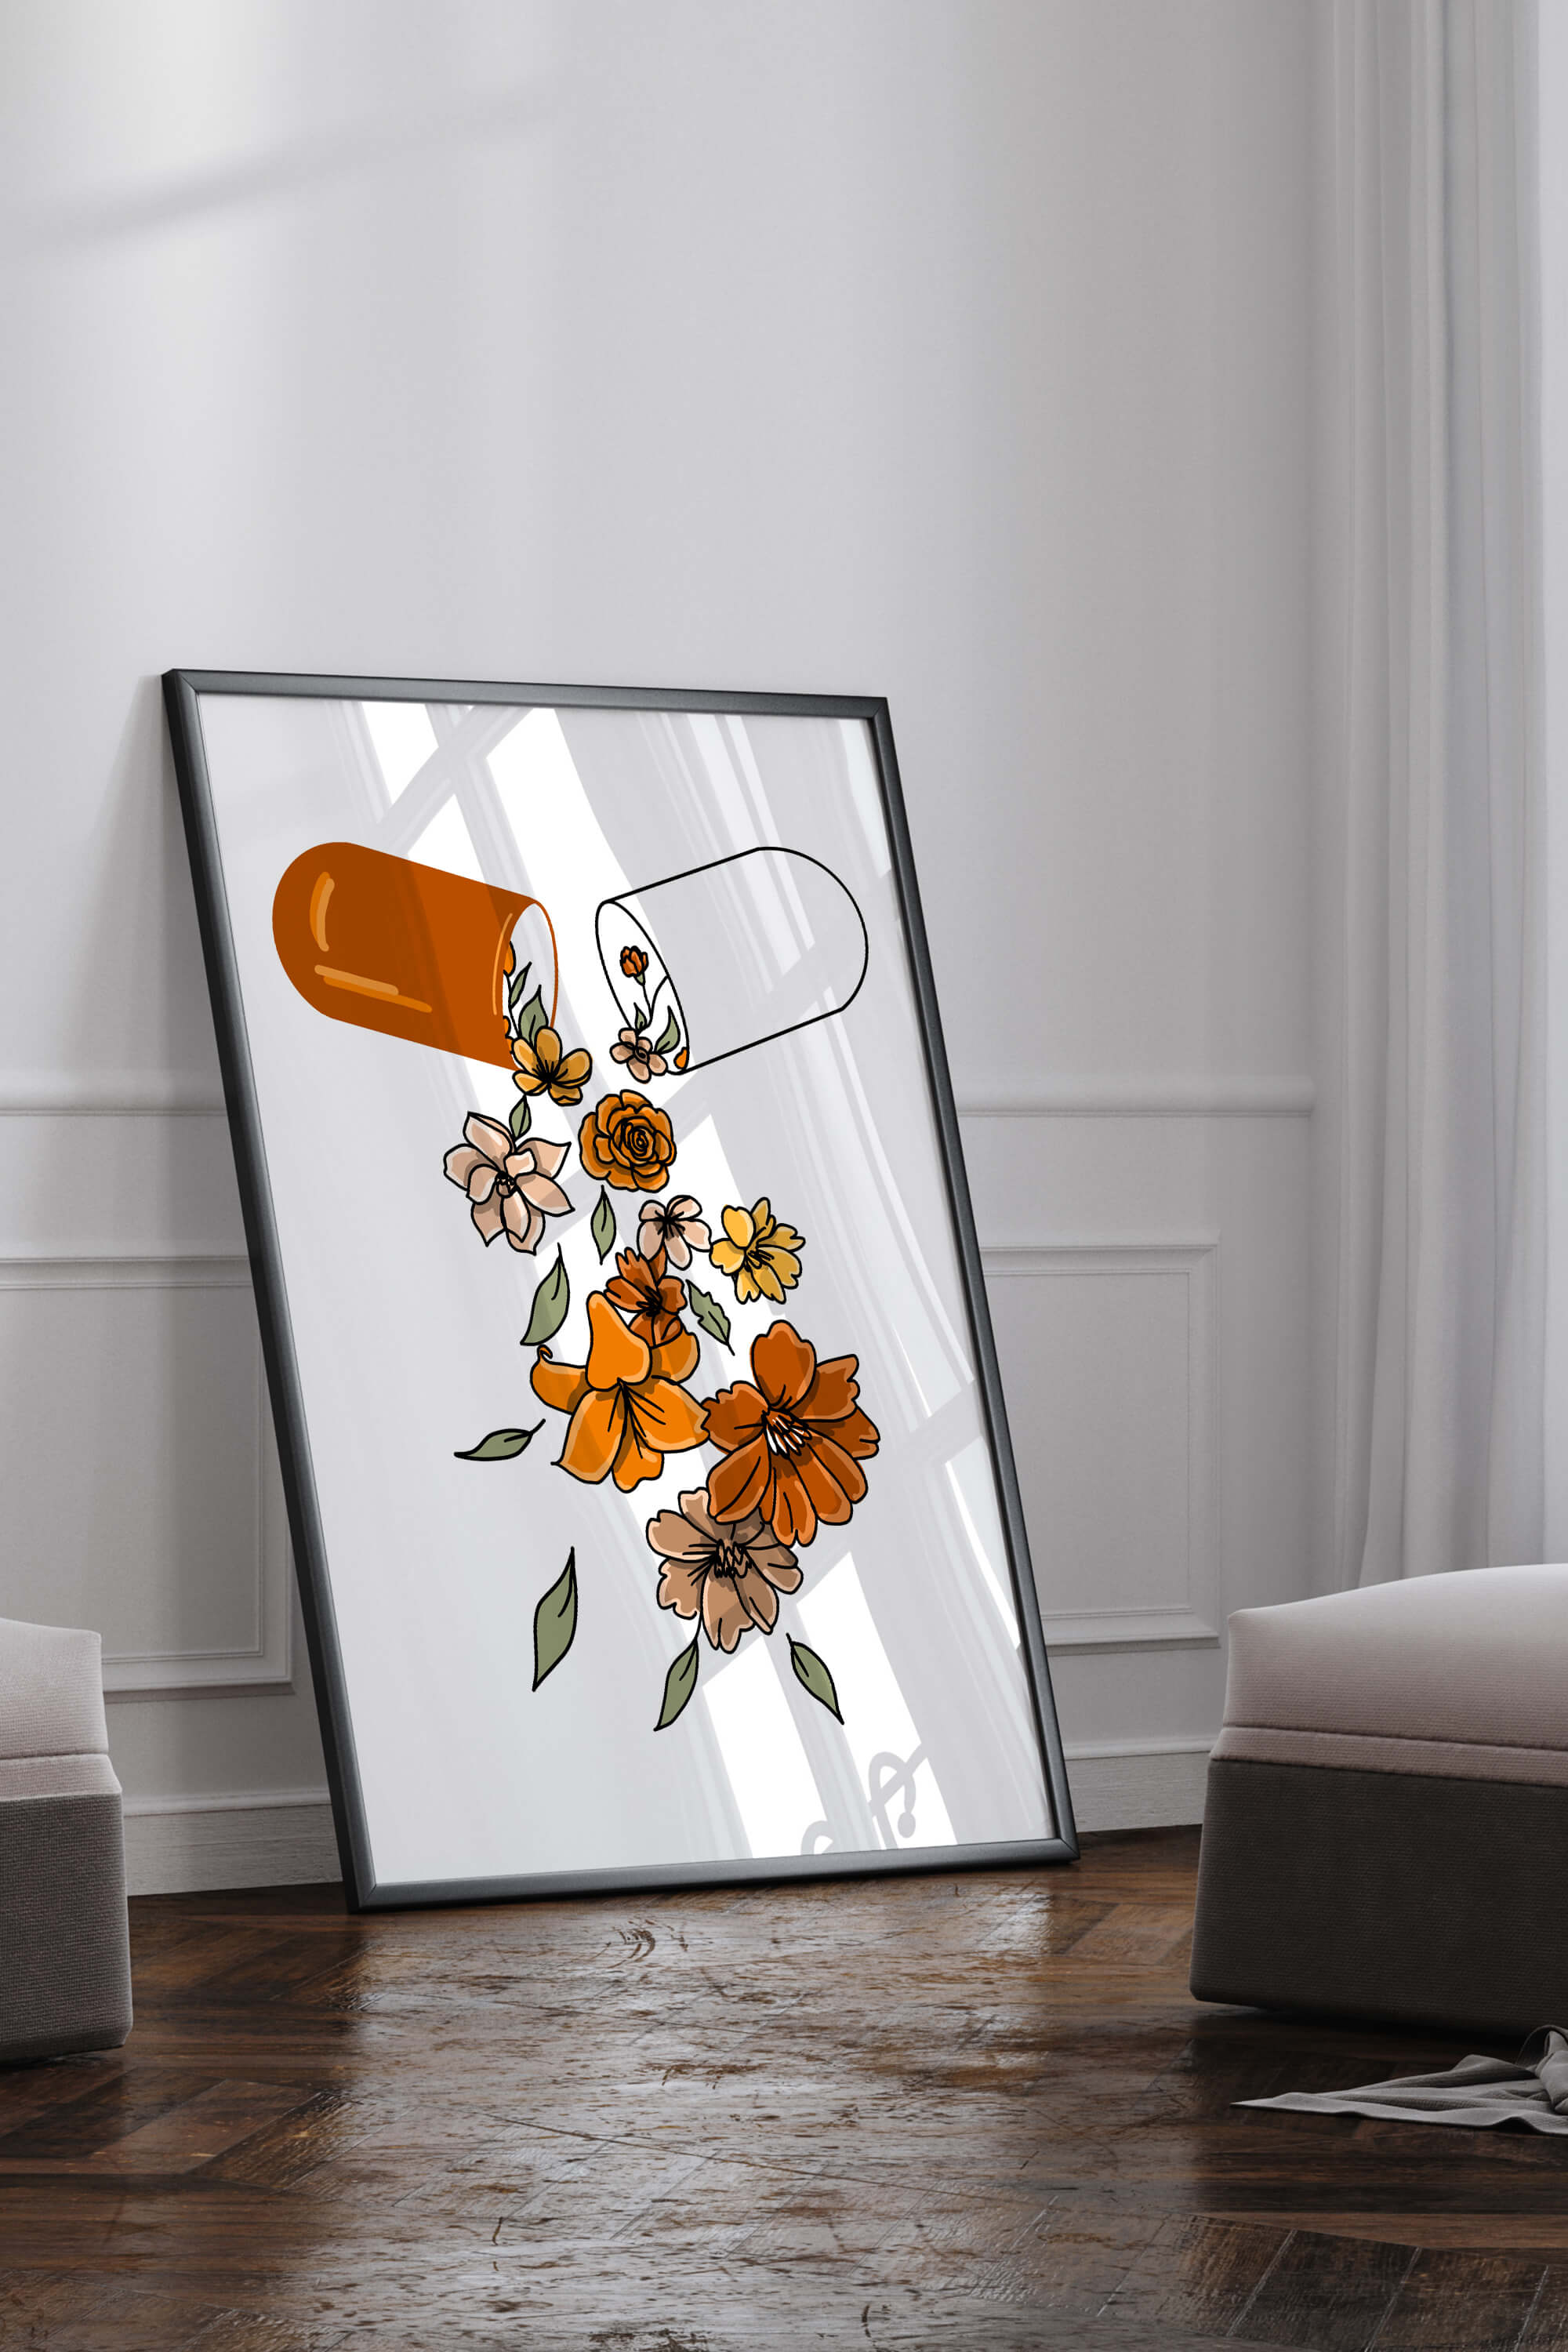 Elegant Medical Artwork perfect for a pharmacist's office, highlighting aesthetic pill illustrations with flower details.